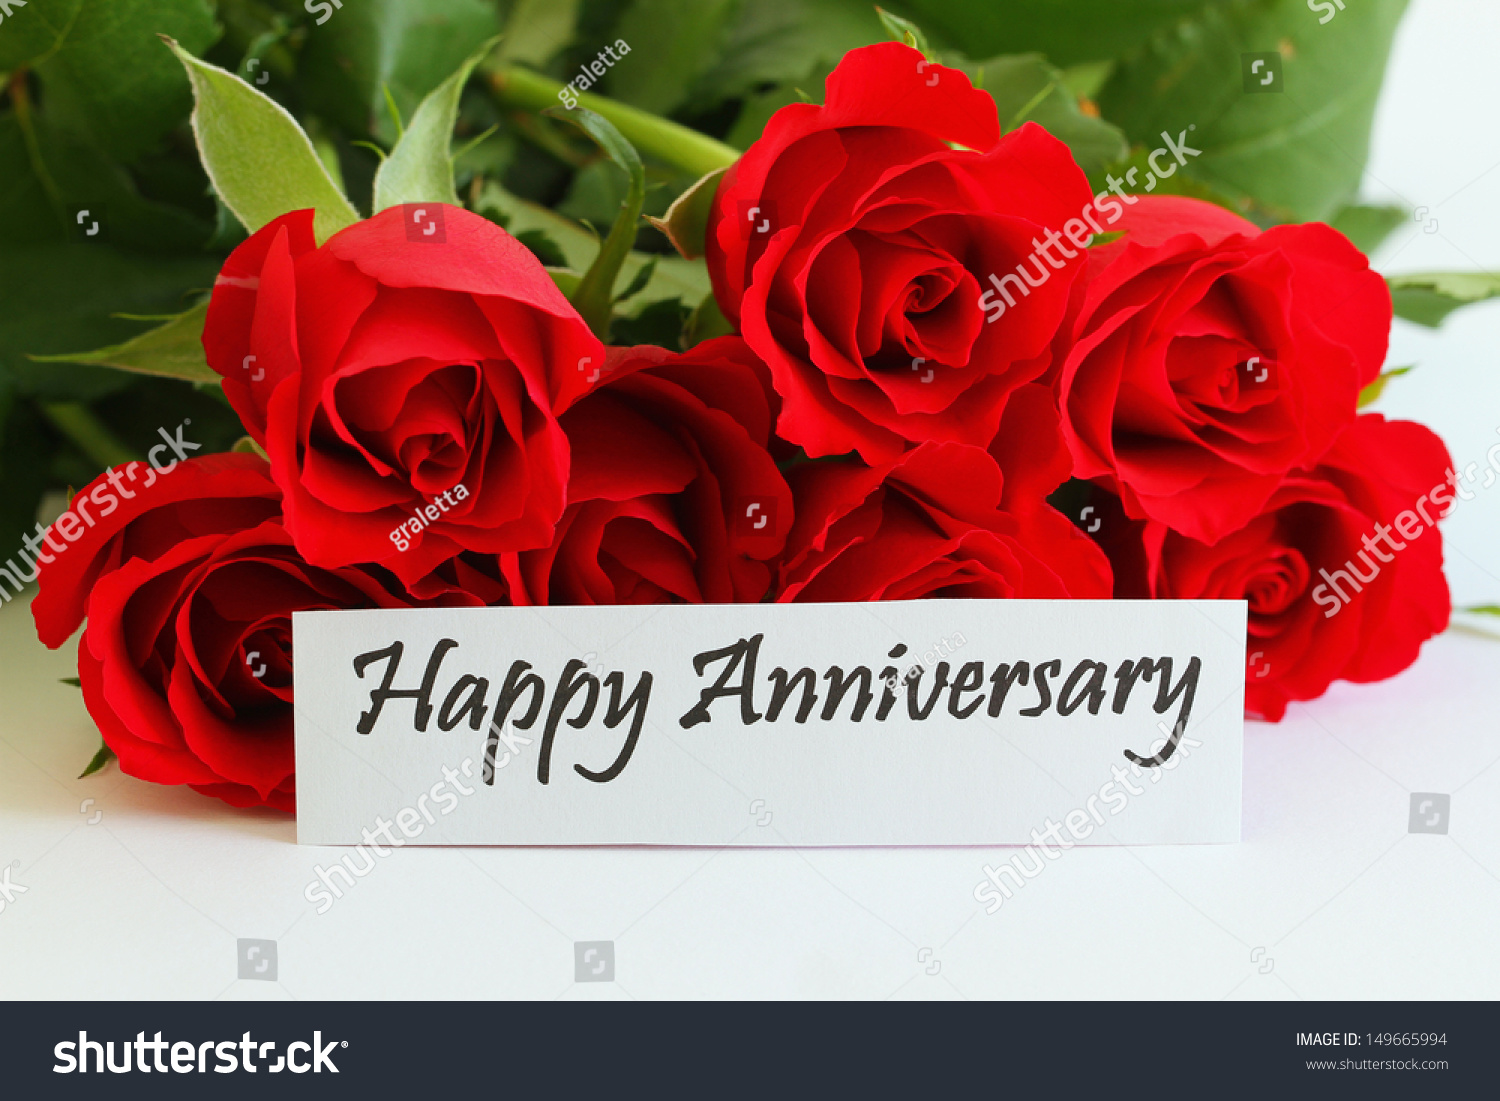 happy anniversary card red roses stock photo (edit now